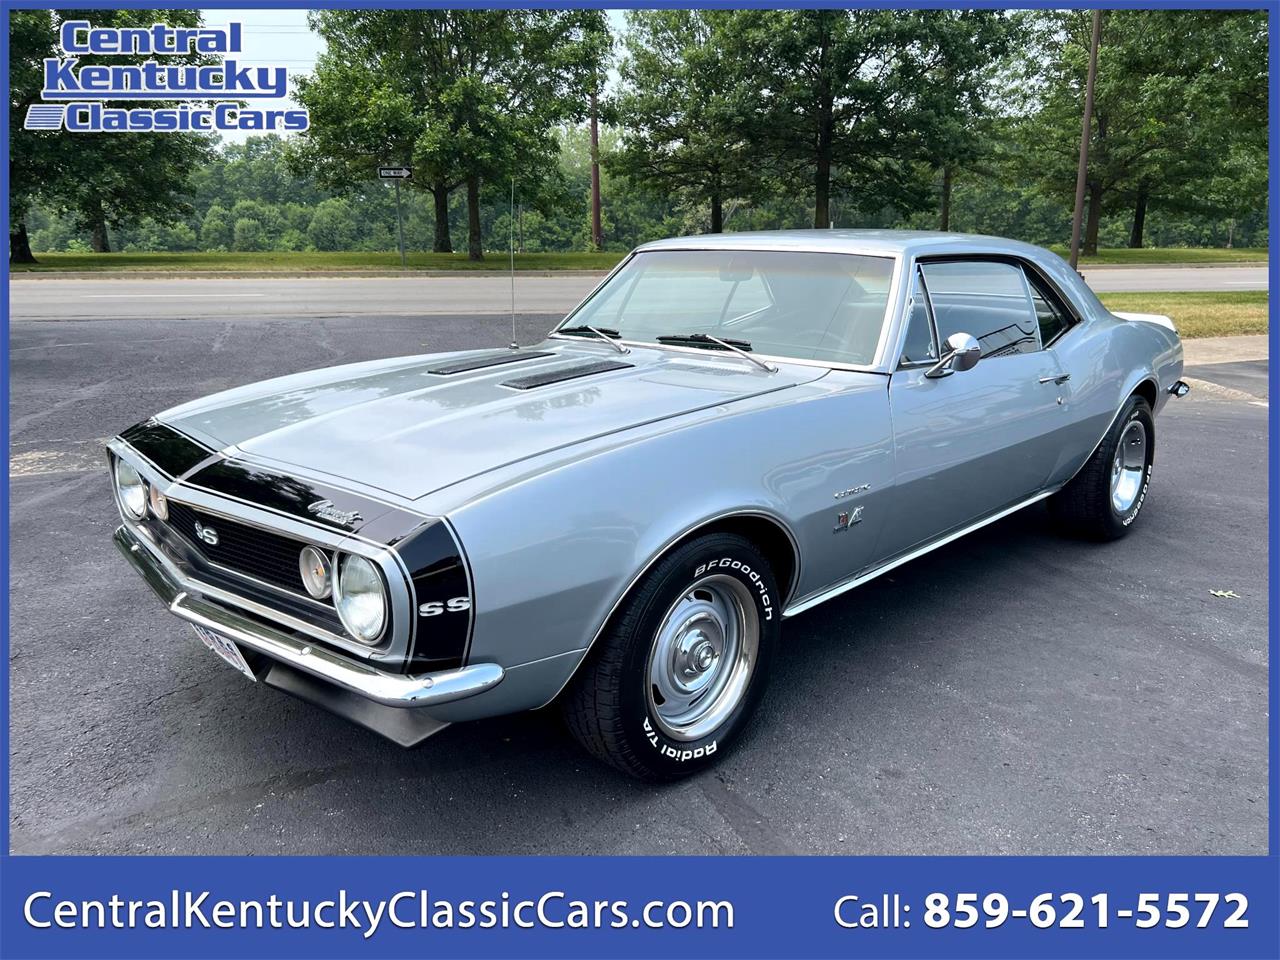 For Sale: 1967 Chevrolet Camaro SS in Paris , Kentucky for sale in Paris, KY